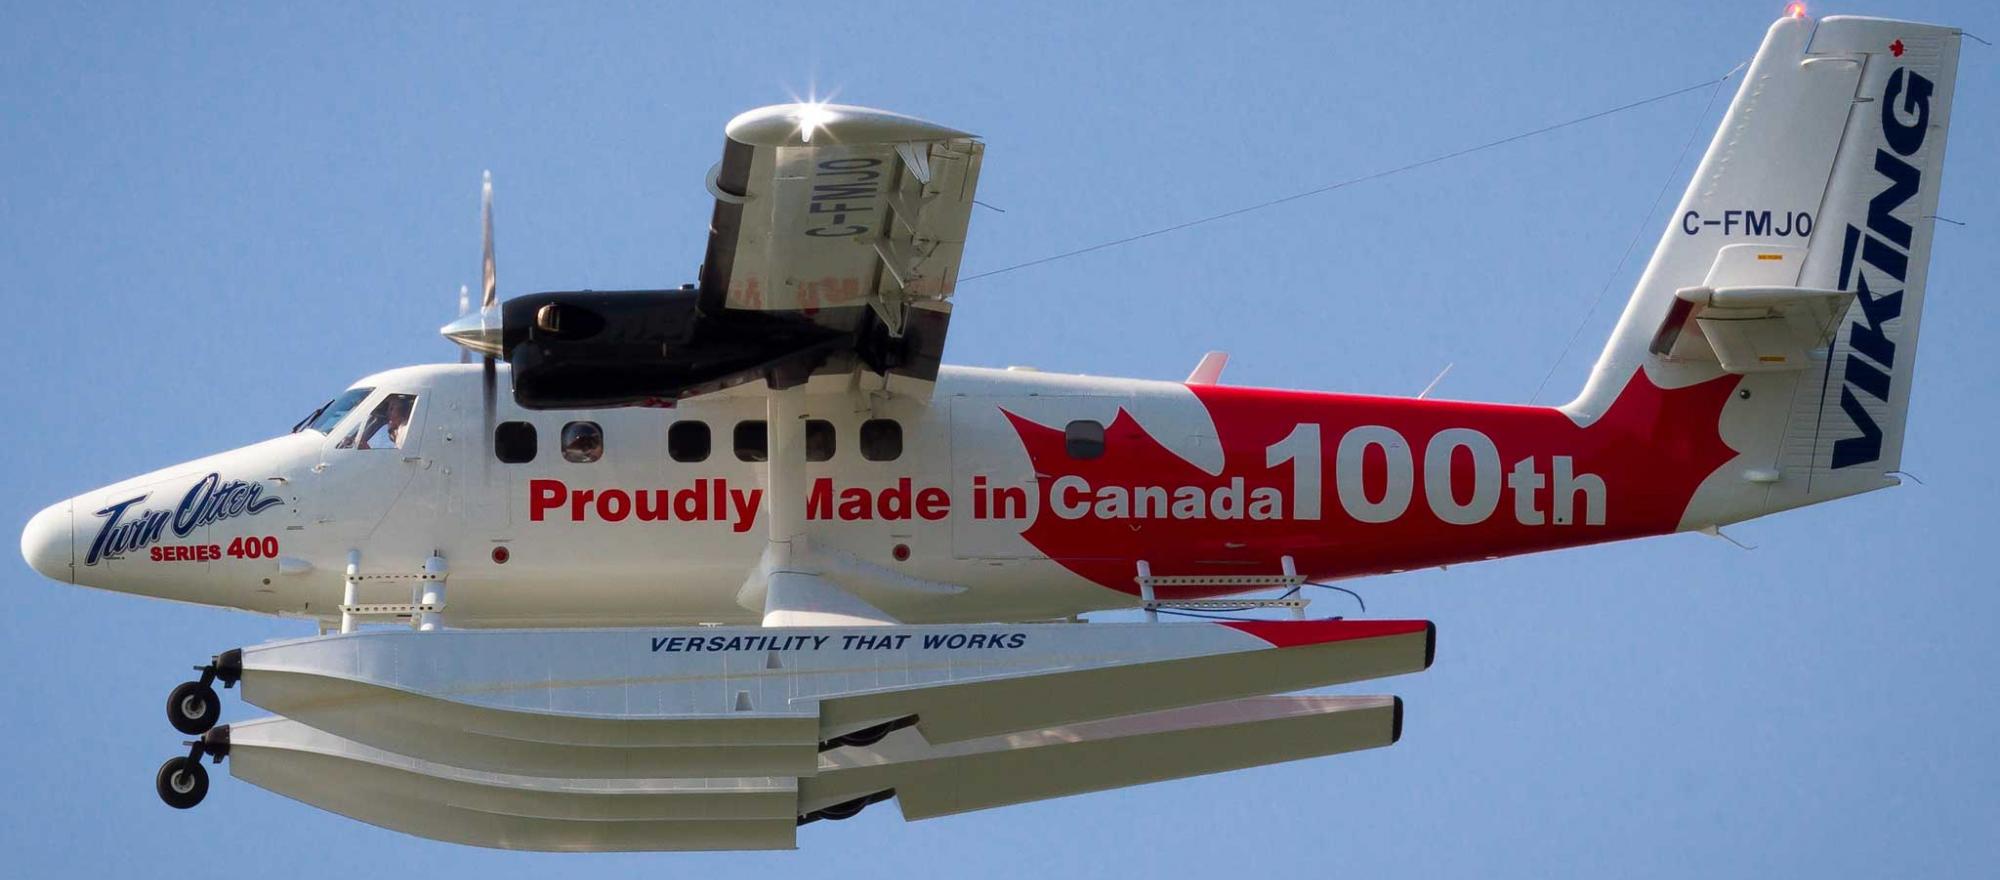 100th Series 400 Twin Otter by Viking.